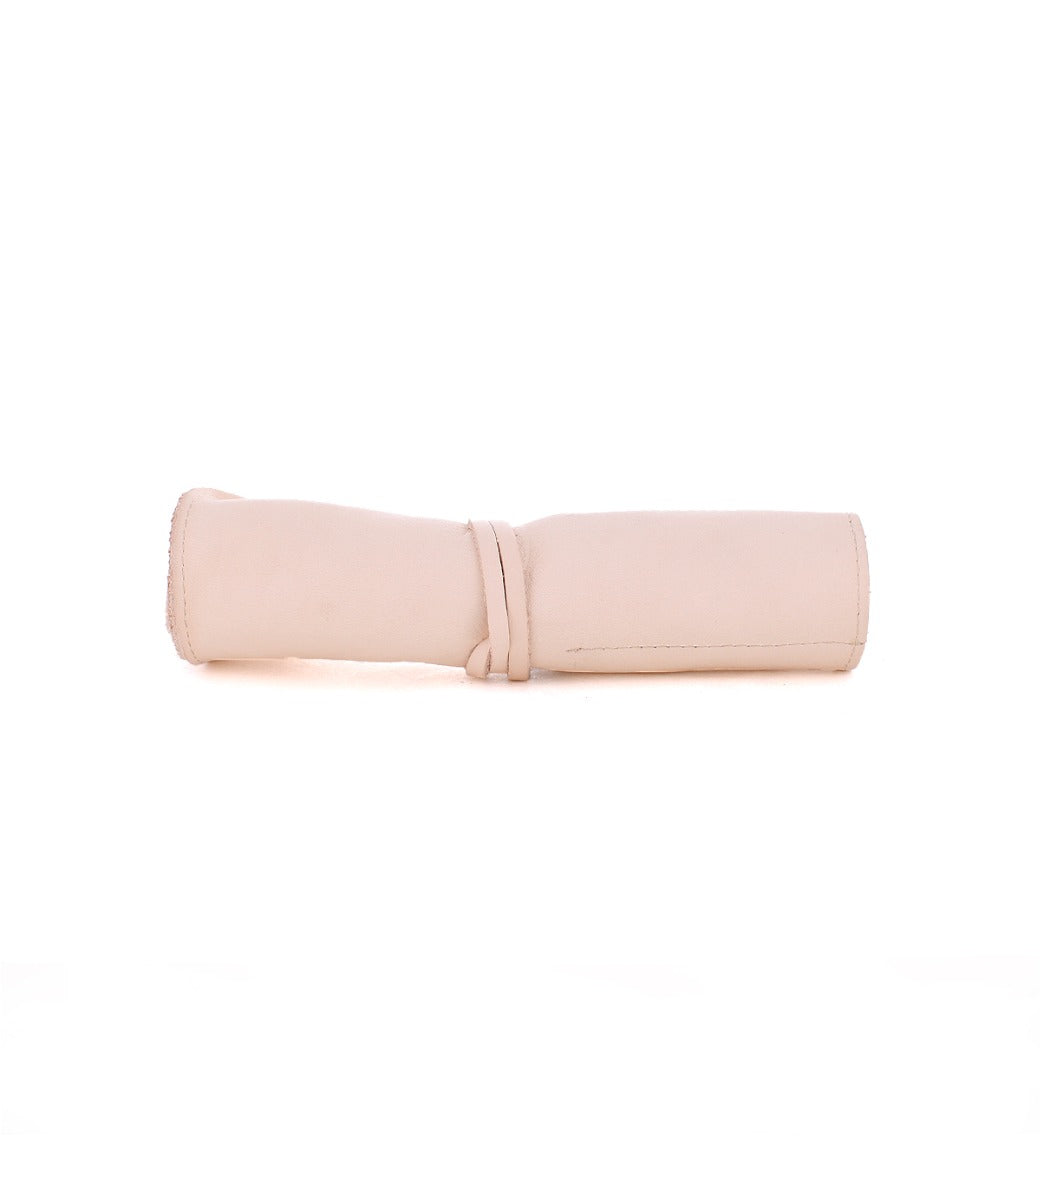 A rolled-up, light beige Prepped Leather Wrap from Bed Stu, designed to hold artist tools, with a simple leather tie closure, positioned on a plain white background.